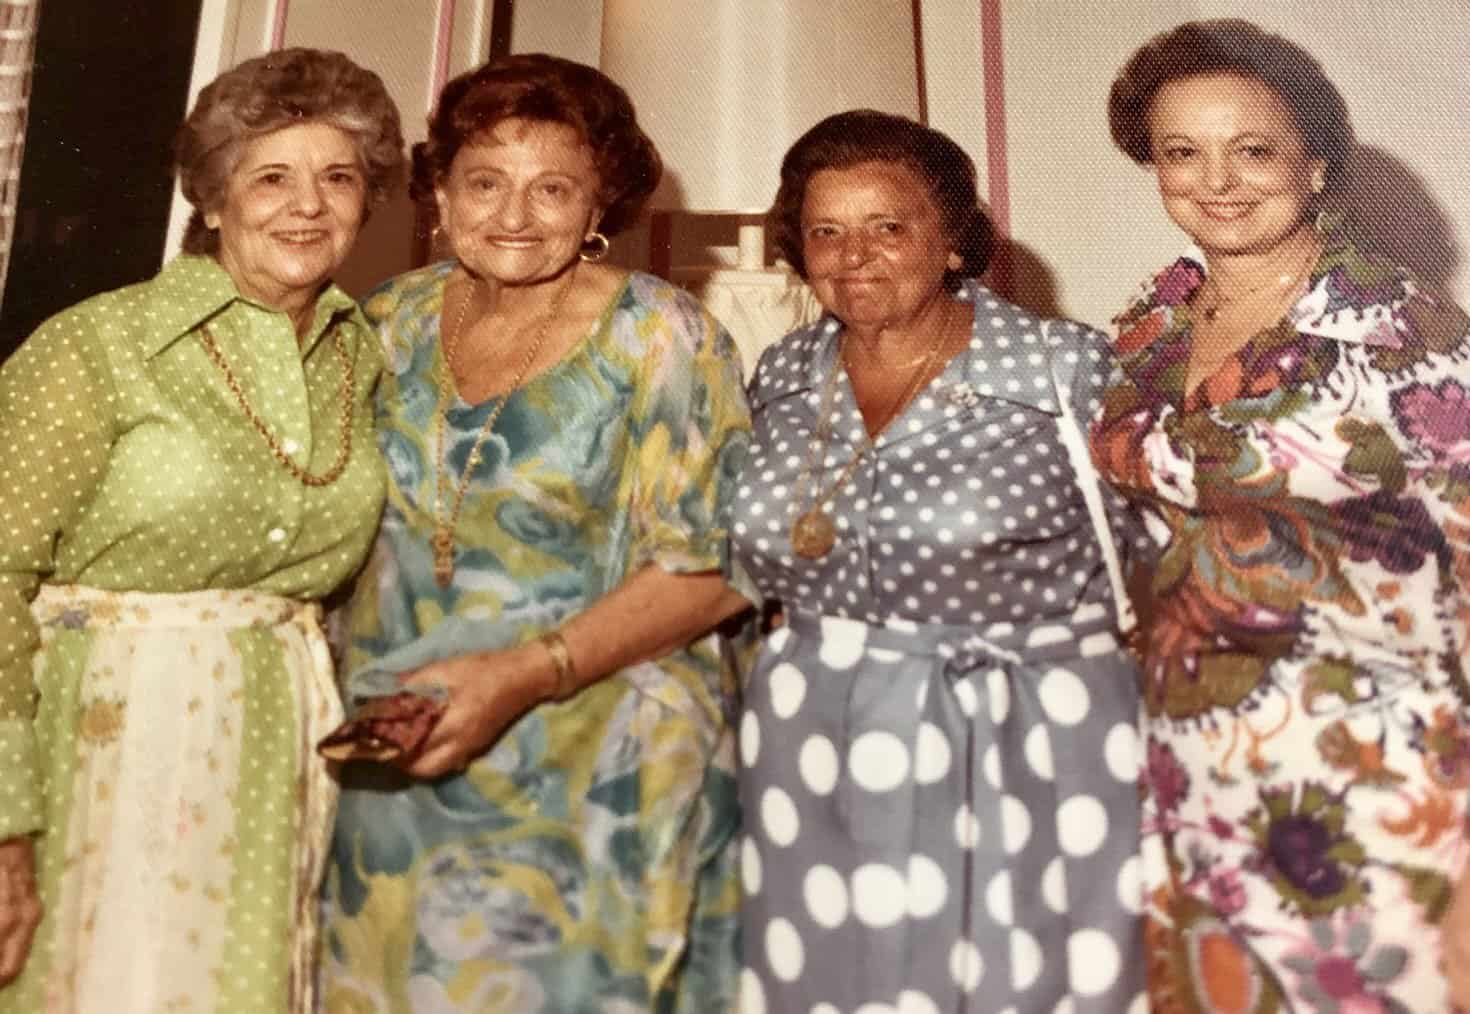 Right to left: My grandmother, Bea; Aunt Dora; Aunt Molly; Aunt Shirley